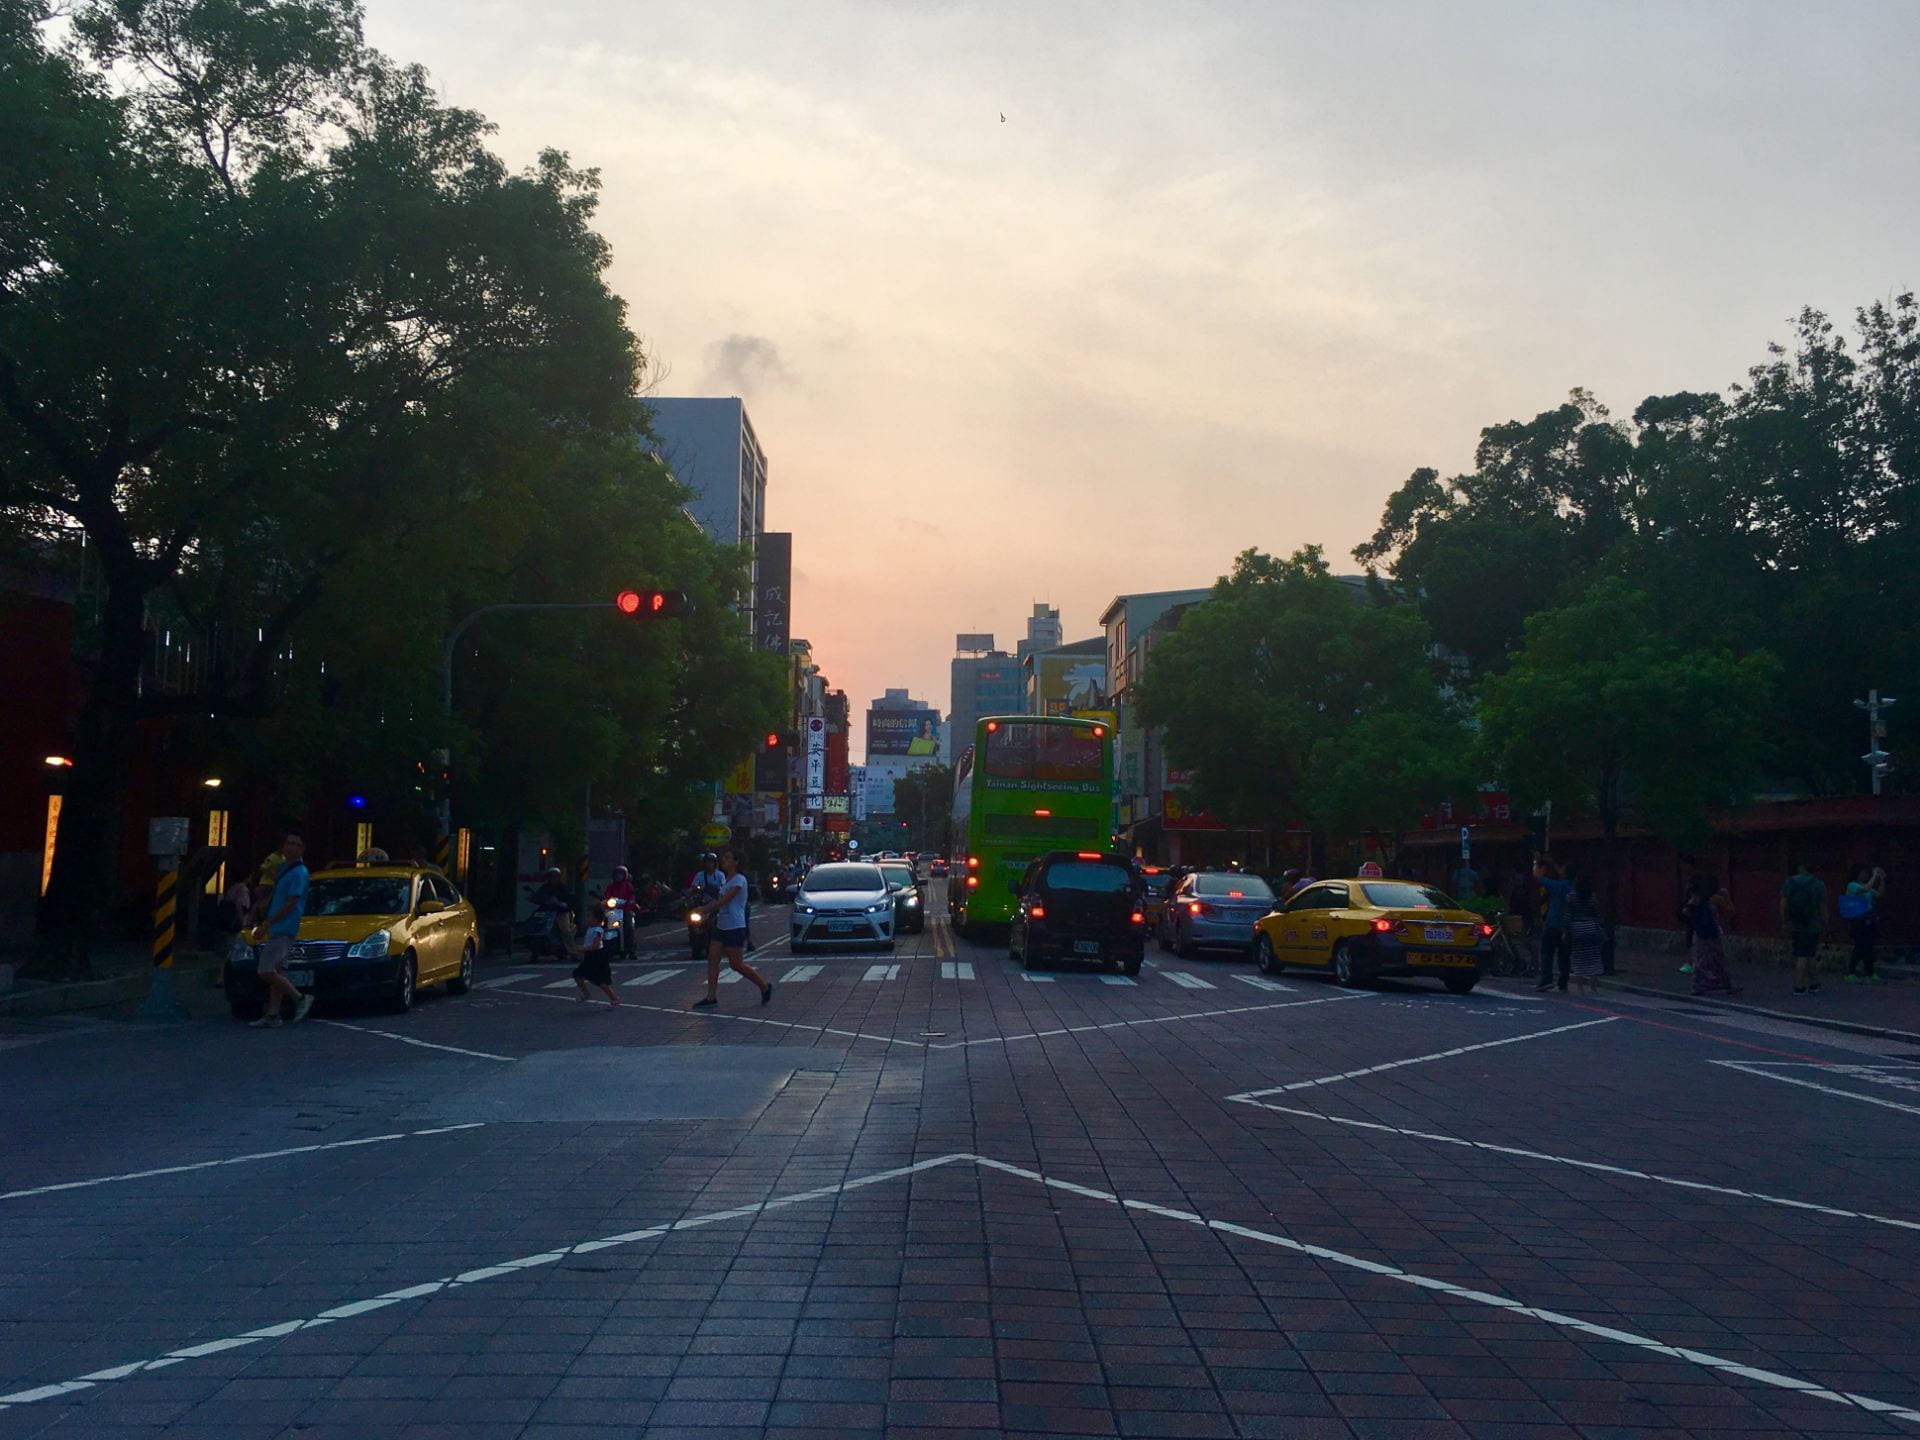 A crowd crosses a busy intersection lined with cars in Tainan as the sun sets